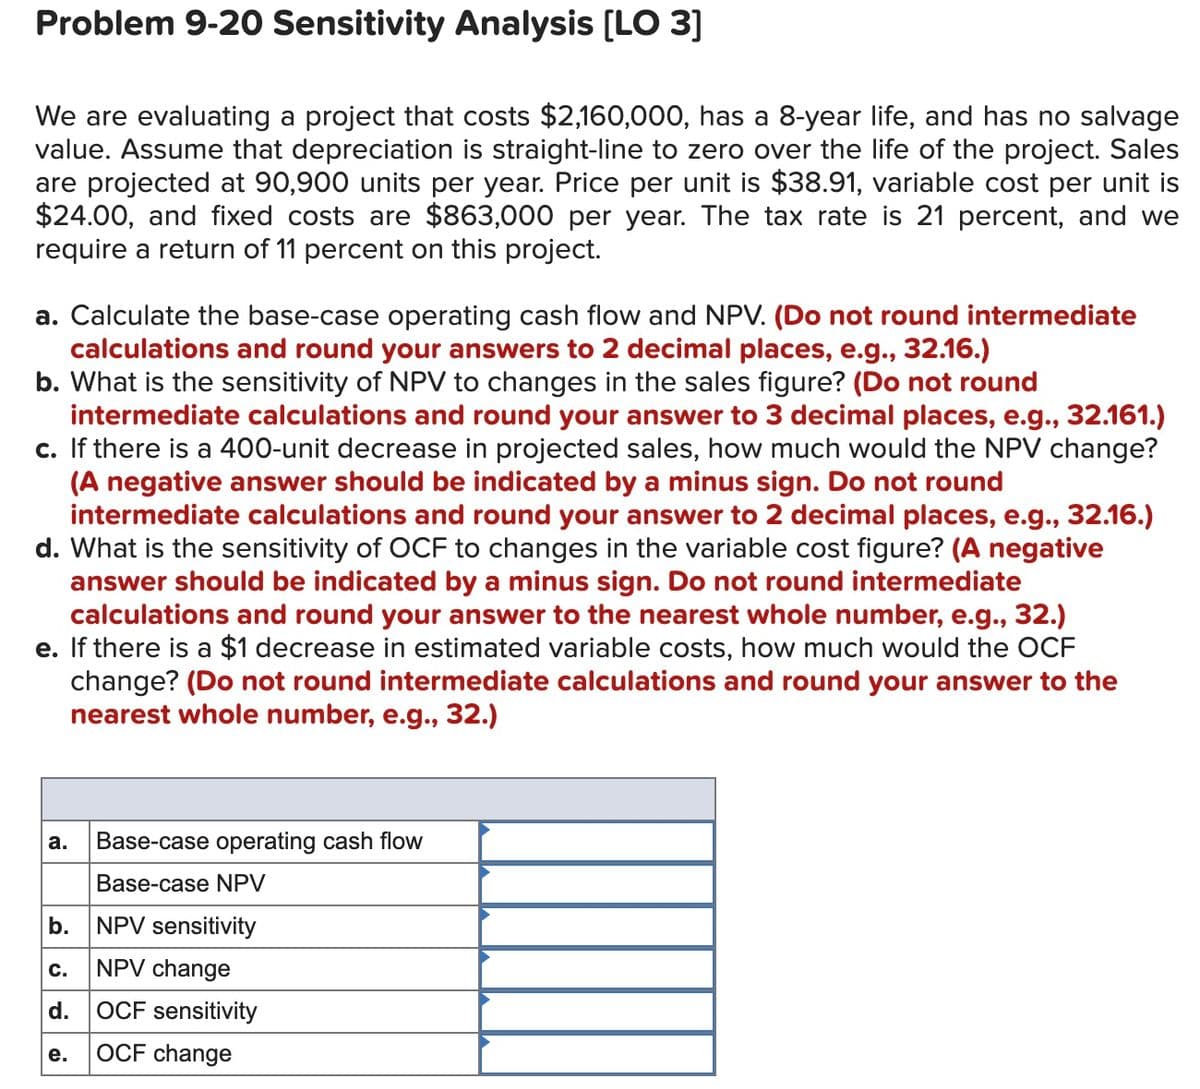 Problem 9-20 Sensitivity Analysis (LO 3]
We are evaluating a project that costs $2,160,000, has a 8-year life, and has no salvage
value. Assume that depreciation is straight-line to zero over the life of the project. Sales
are projected at 90,900 units per year. Price per unit is $38.91, variable cost per unit is
$24.00, and fixed costs are $863,000 per year. The tax rate is 21 percent, and we
require a return of 11 percent on this project.
a. Calculate the base-case operating cash flow and NPV. (Do not round intermediate
calculations and round your answers to 2 decimal places, e.g., 32.16.)
b. What is the sensitivity of NPV to changes in the sales figure? (Do not round
intermediate calculations and round your answer to 3 decimal places, e.g., 32.161.)
c. If there is a 400-unit decrease in projected sales, how much would the NPV change?
(A negative answer should be indicated by a minus sign. Do not round
intermediate calculations and round your answer to 2 decimal places, e.g., 32.16.)
d. What is the sensitivity of OCF to changes in the variable cost figure? (A negative
answer should be indicated by a minus sign. Do not round intermediate
calculations and round your answer to the nearest whole number, e.g., 32.)
e. If there is a $1 decrease in estimated variable costs, how much would the OCF
change? (Do not round intermediate calculations and round your answer to the
nearest whole number, e.g., 32.)
Base-case operating cash flow
а.
Base-case NPV
b.
NPV sensitivity
NPV change
с.
d.
OCF sensitivity
е.
OCF change
